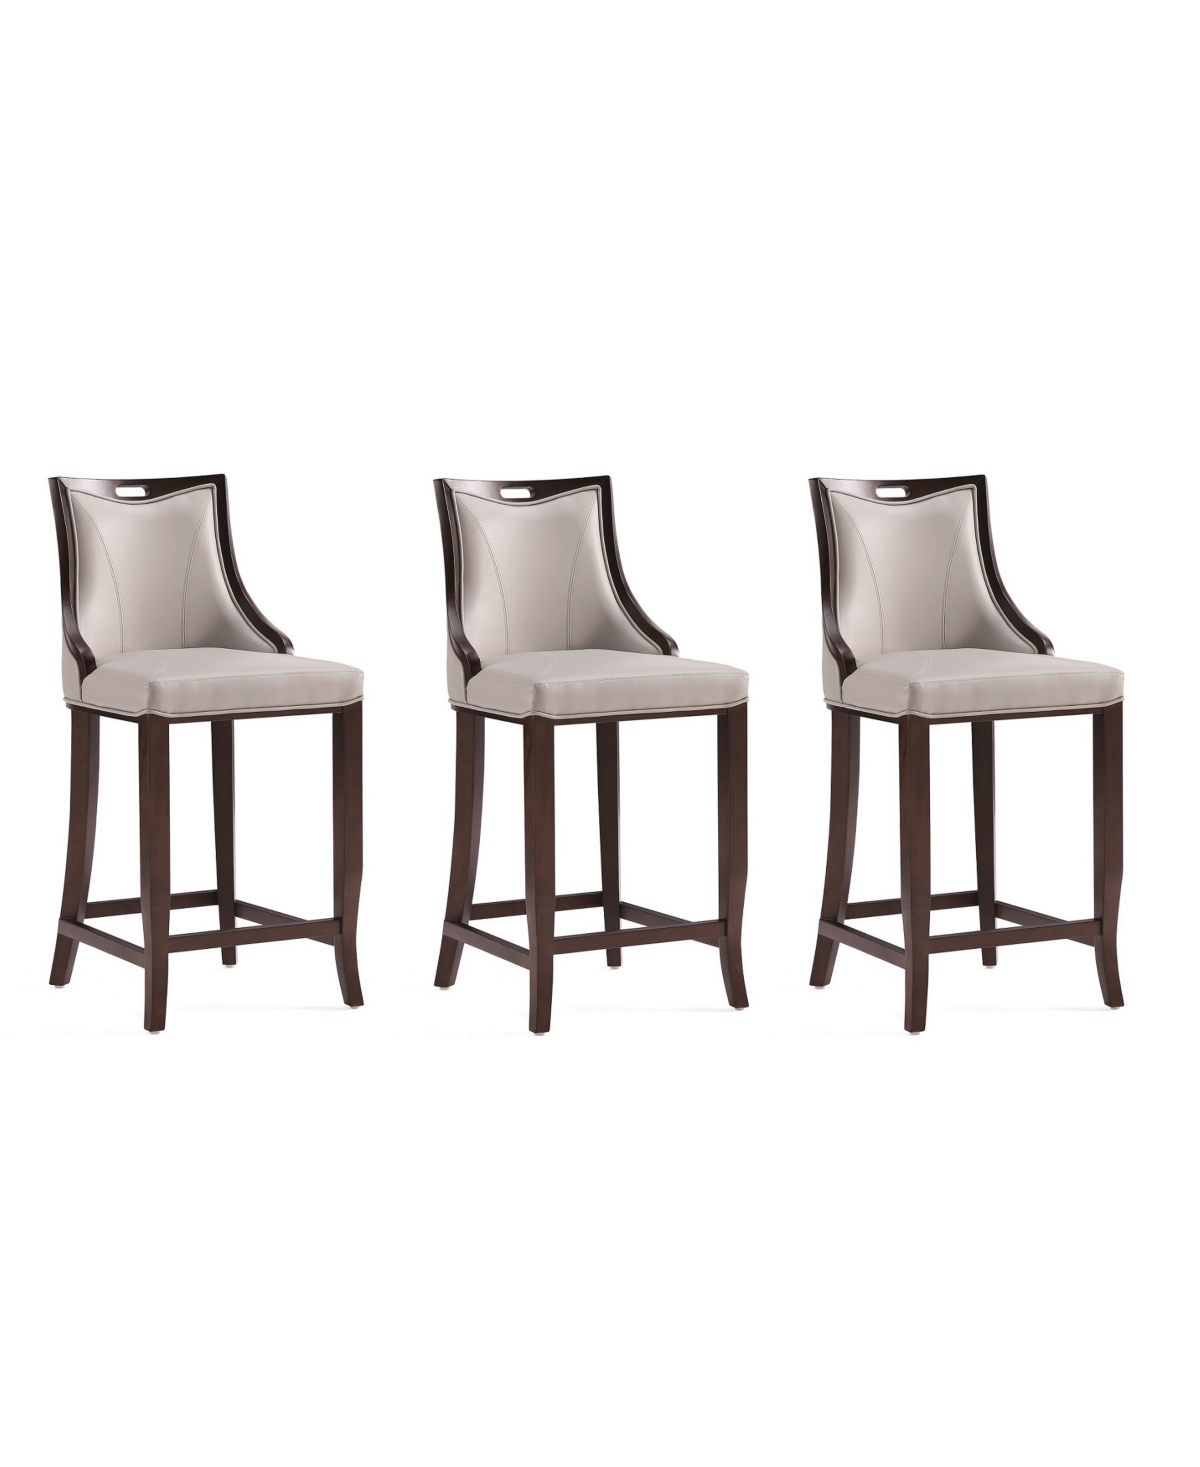 Manhattan Comfort Emperor 19" 3 Piece Beech Wood Faux Leather Upholstered Barstool Set In Light Gray